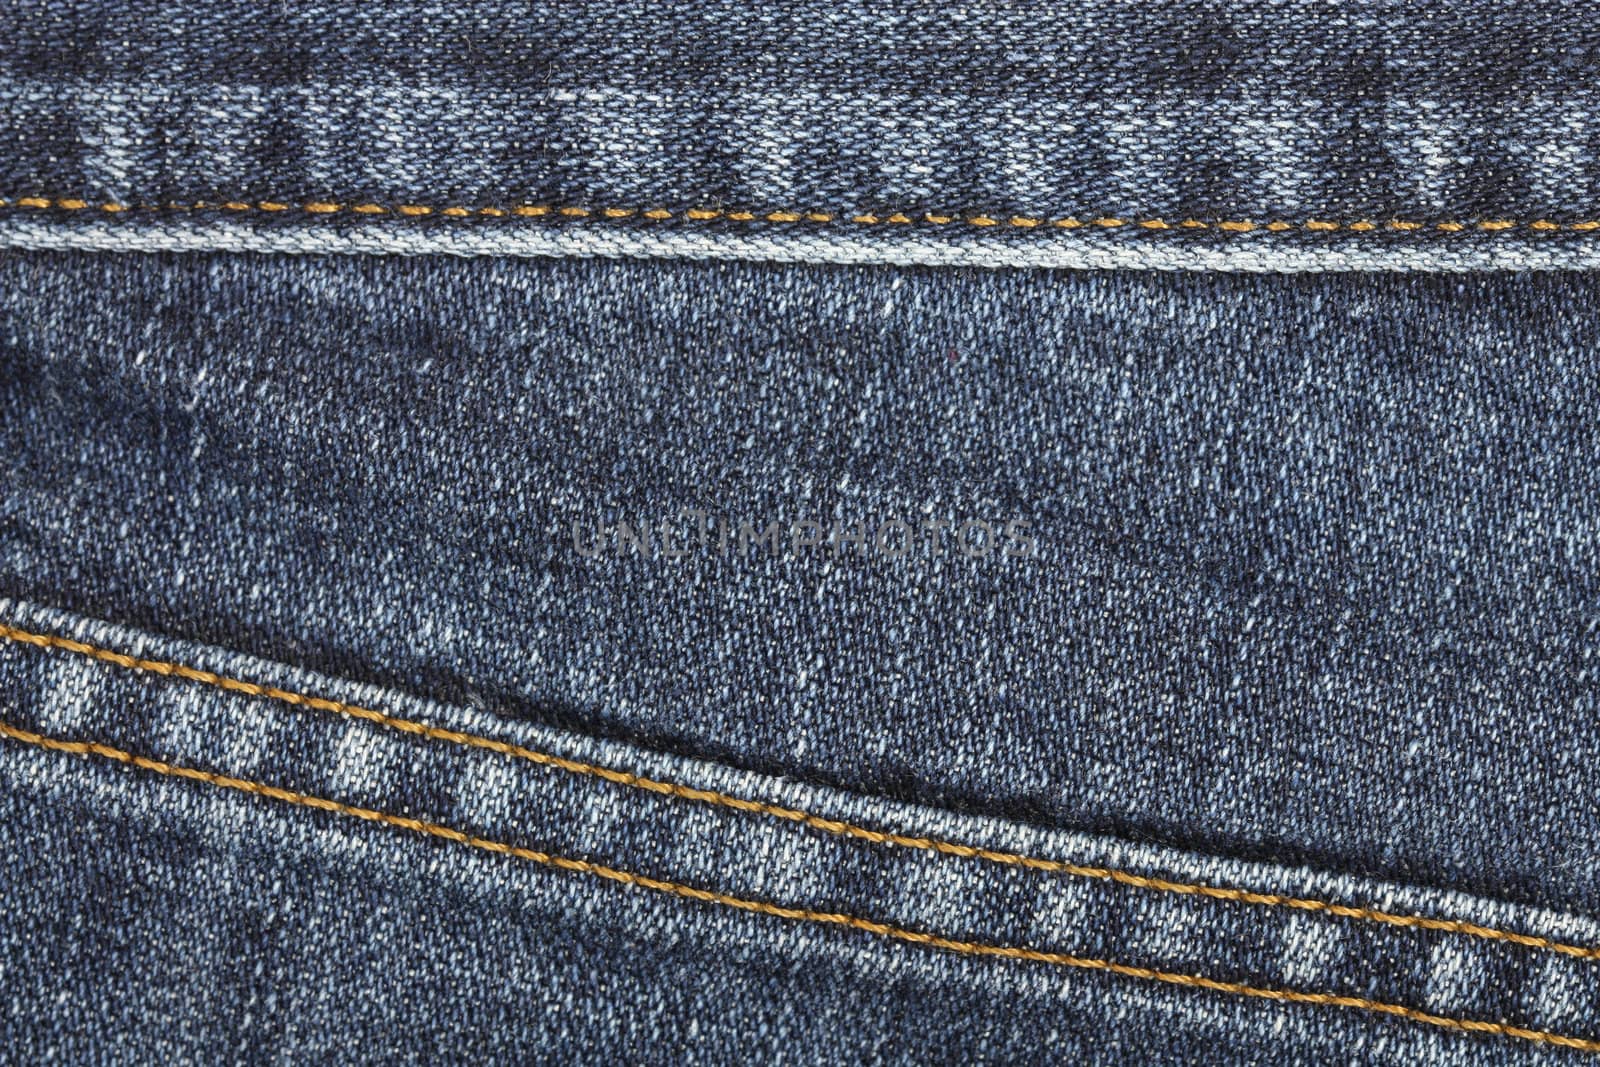 Jeans fabric background texture. Dark blue textile abstract.